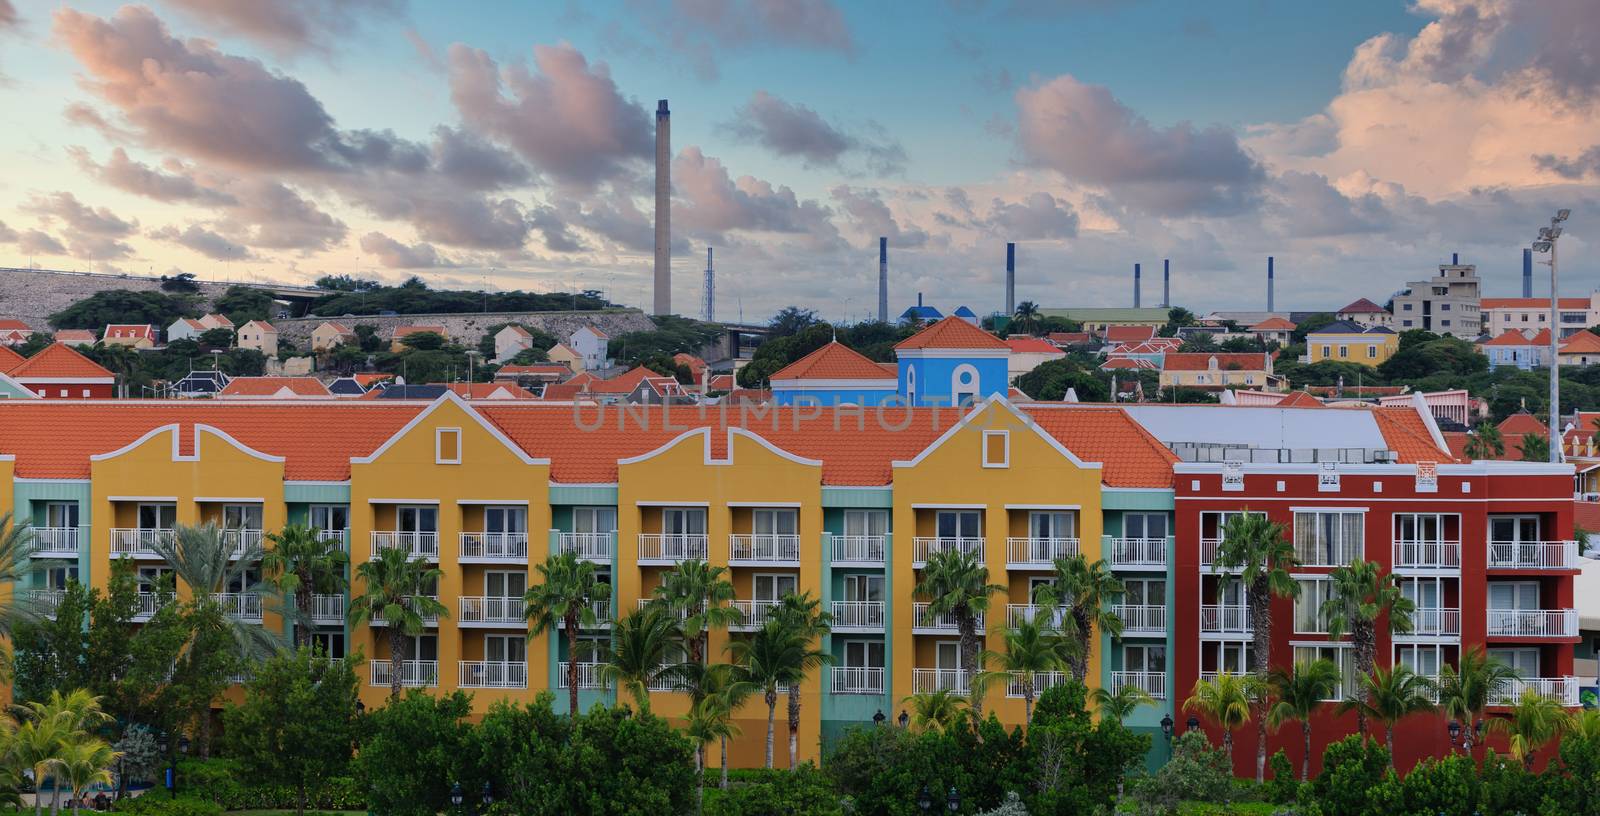 Colorful Resort with Oil Refinery Smokestacks in Background by dbvirago